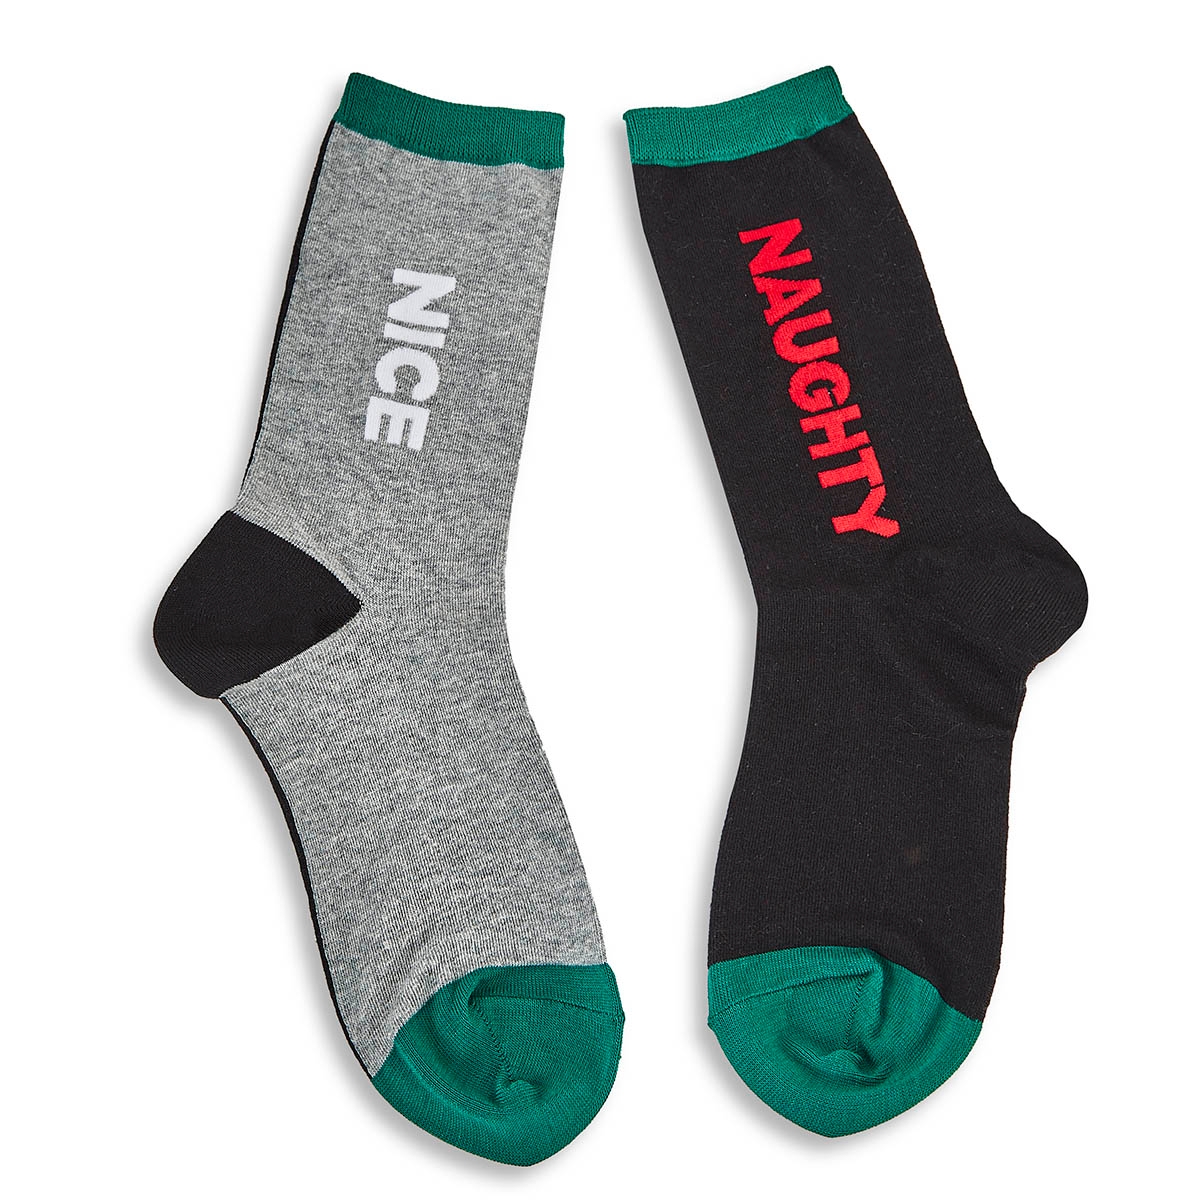 Chaussettes NAUGHTY AND NICE, noir, femmes